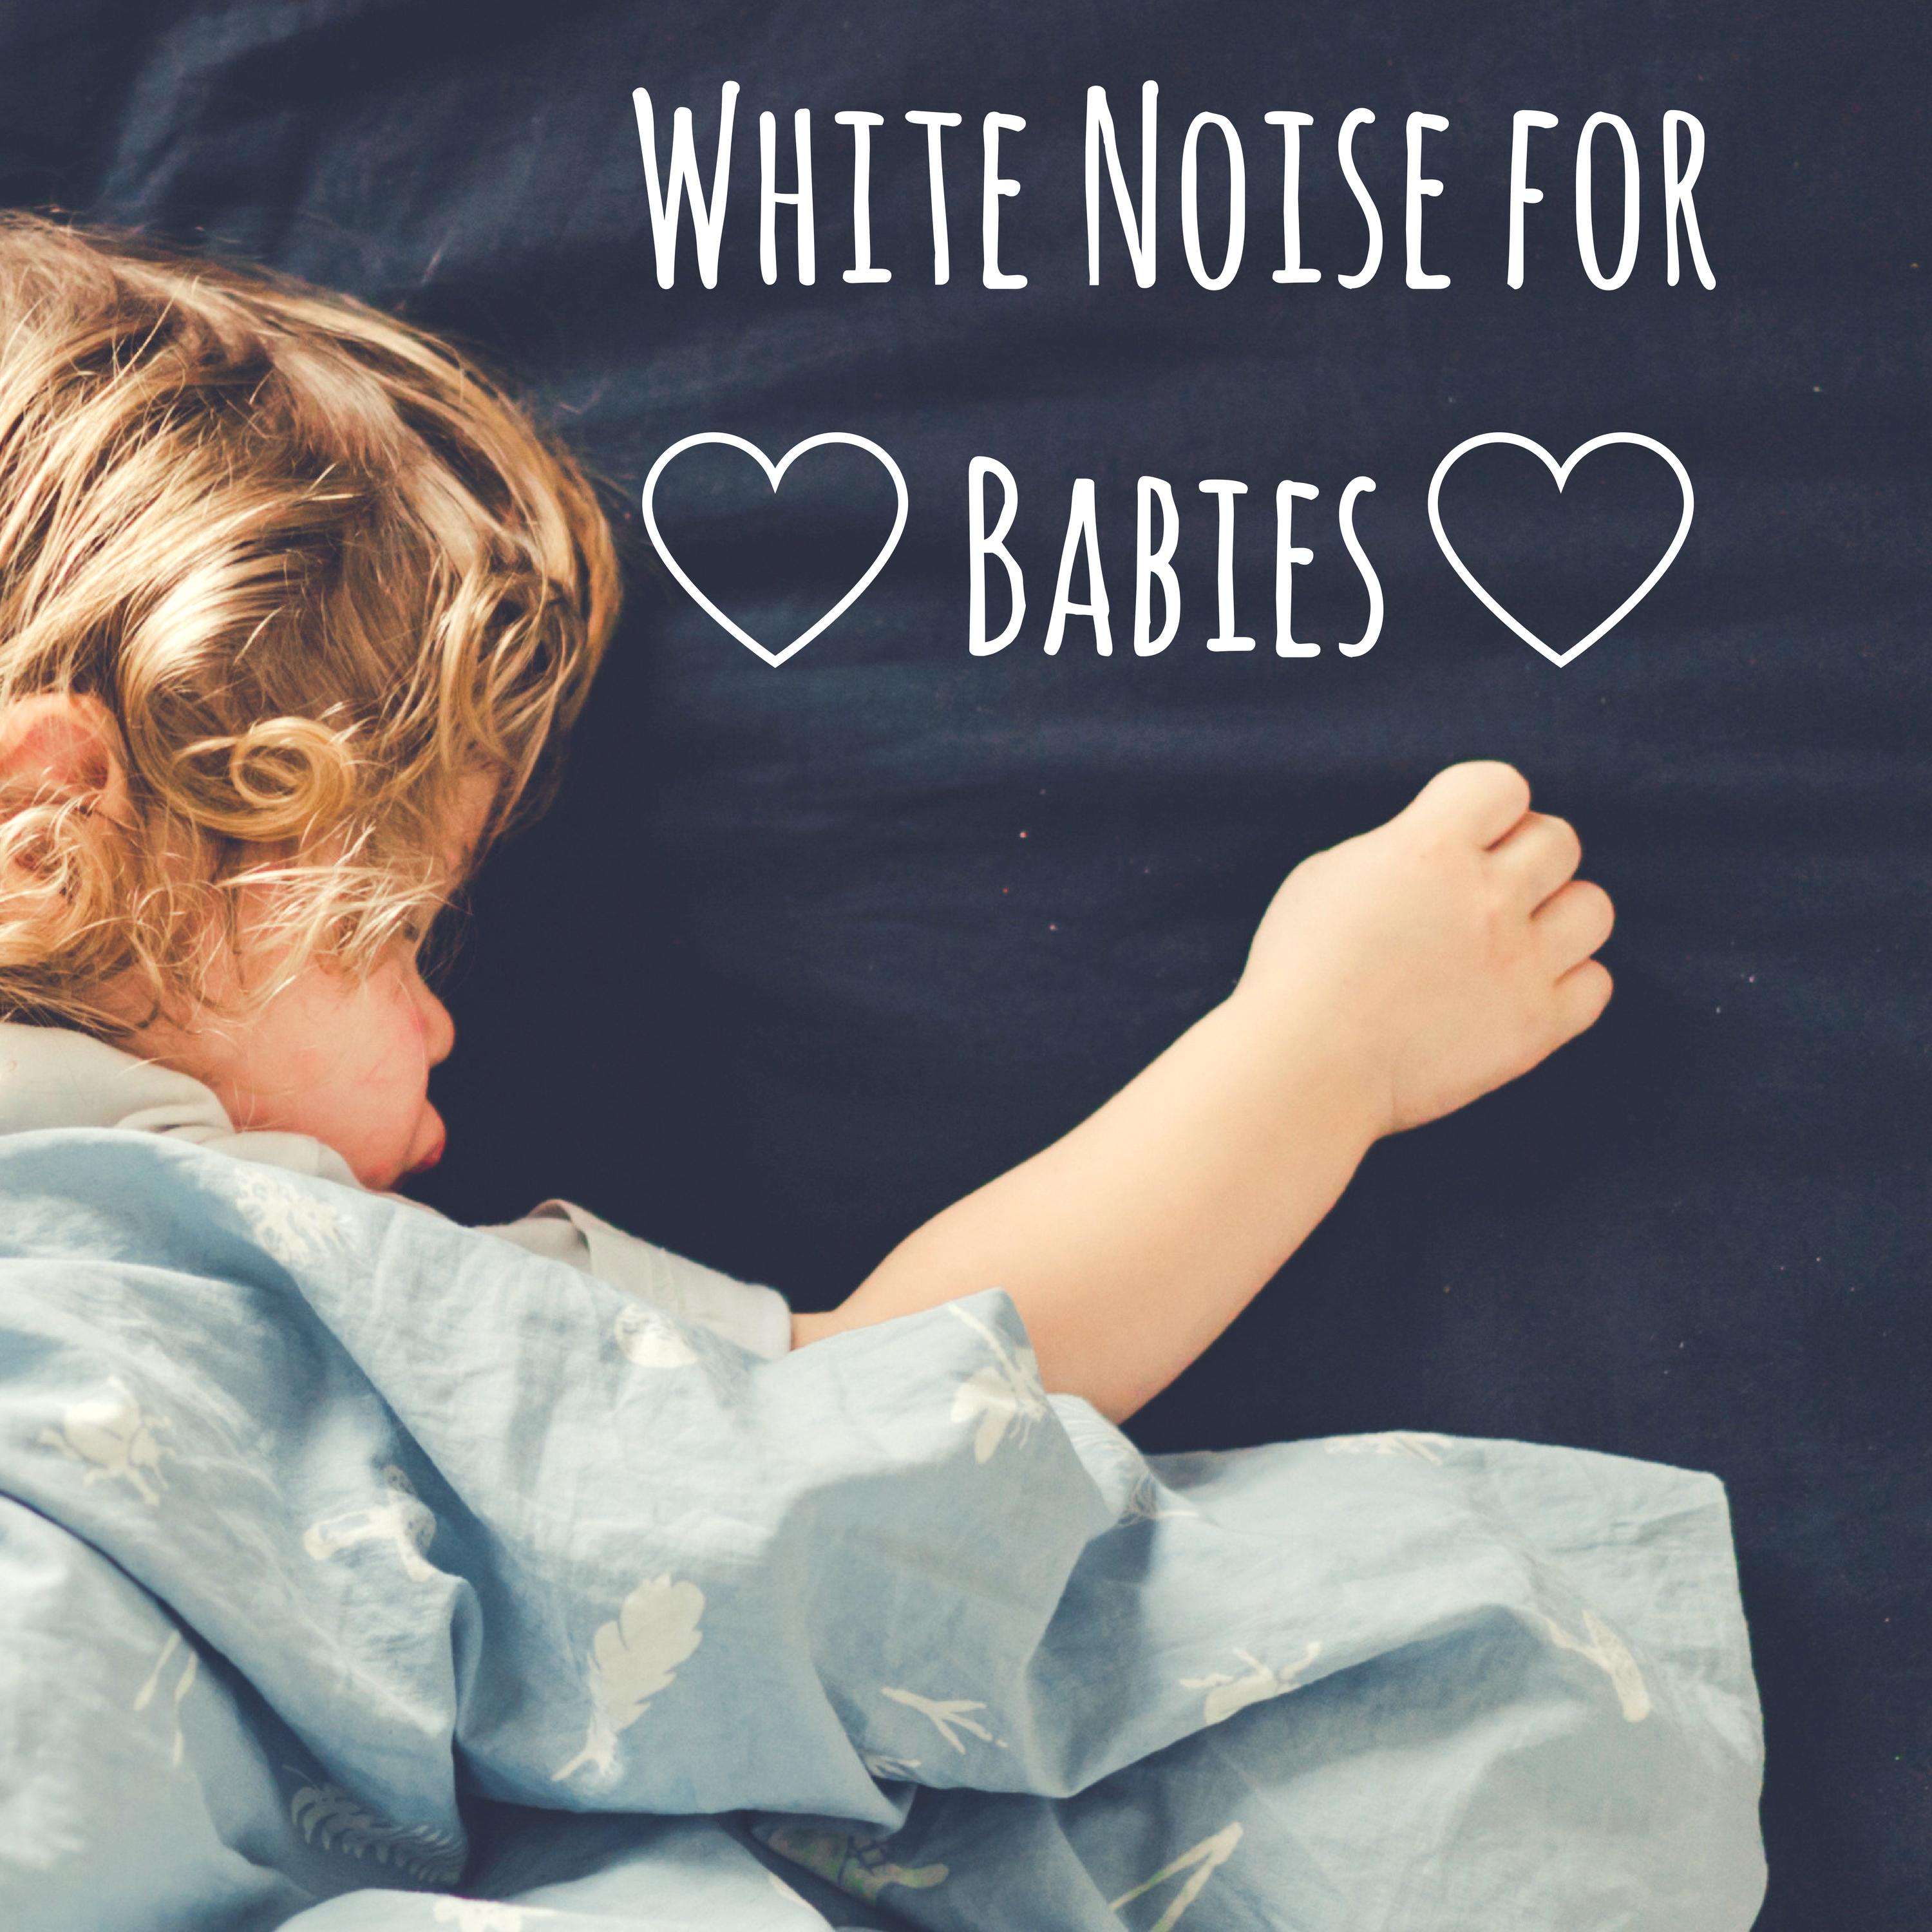 White Noise for Babies - Sleep Therapy